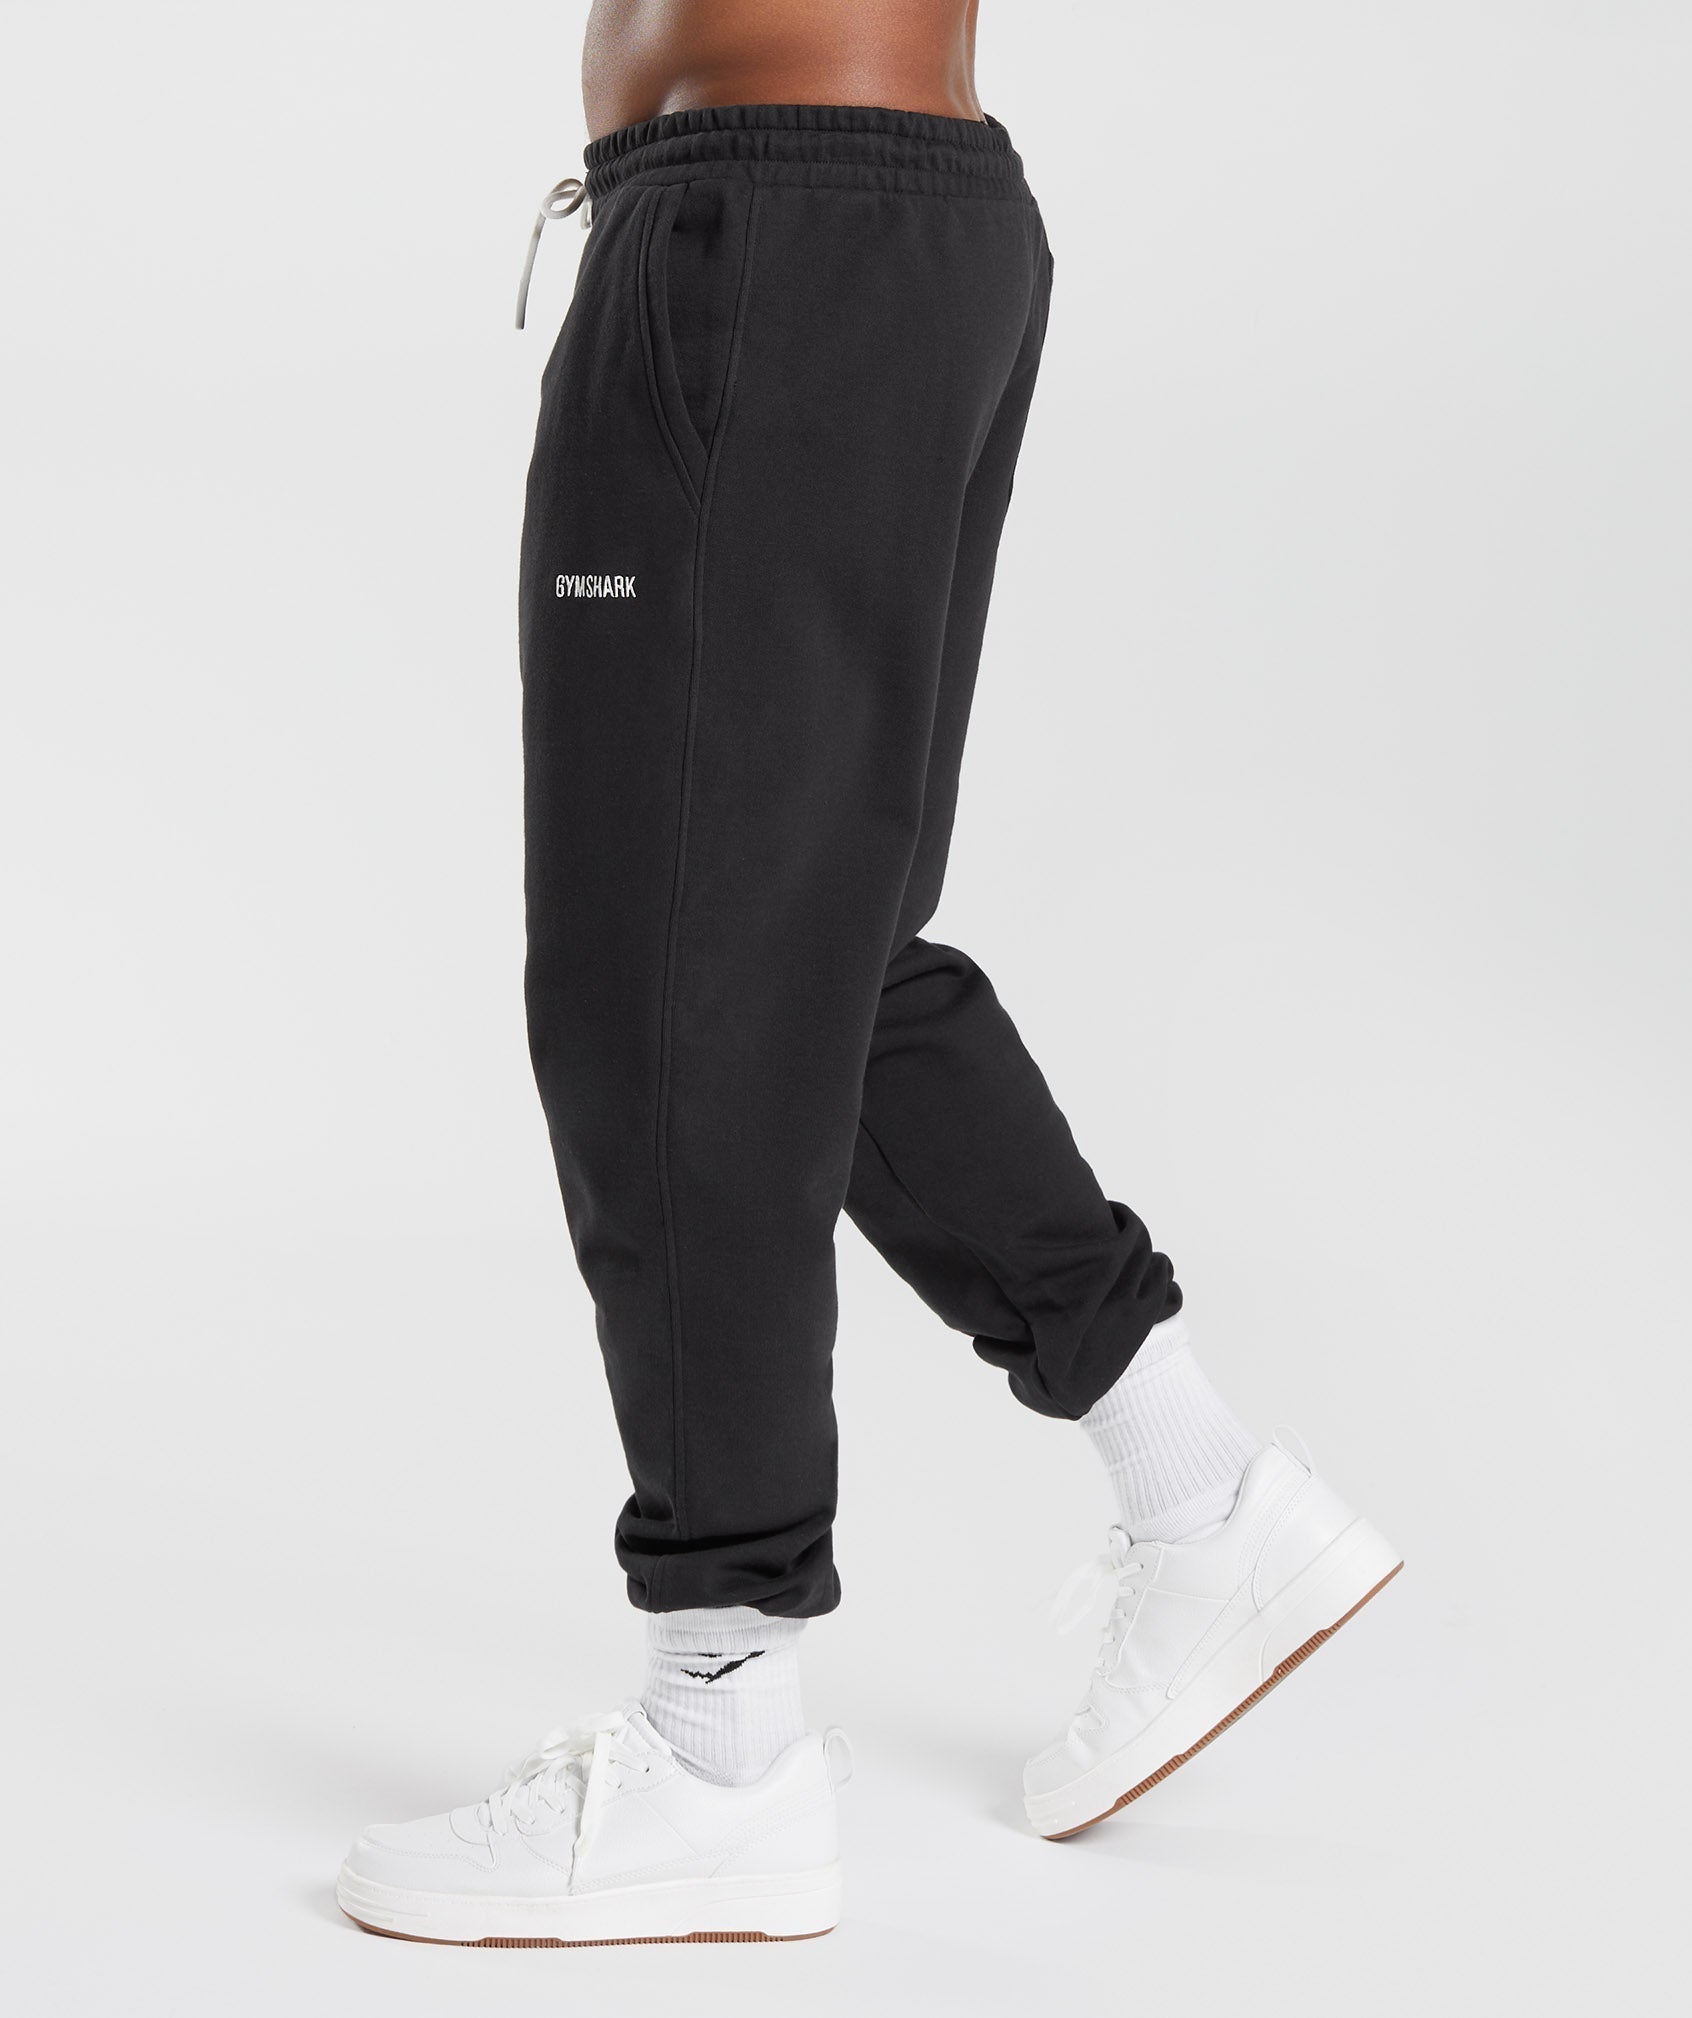 Rest Day Sweats Joggers in Black - view 4